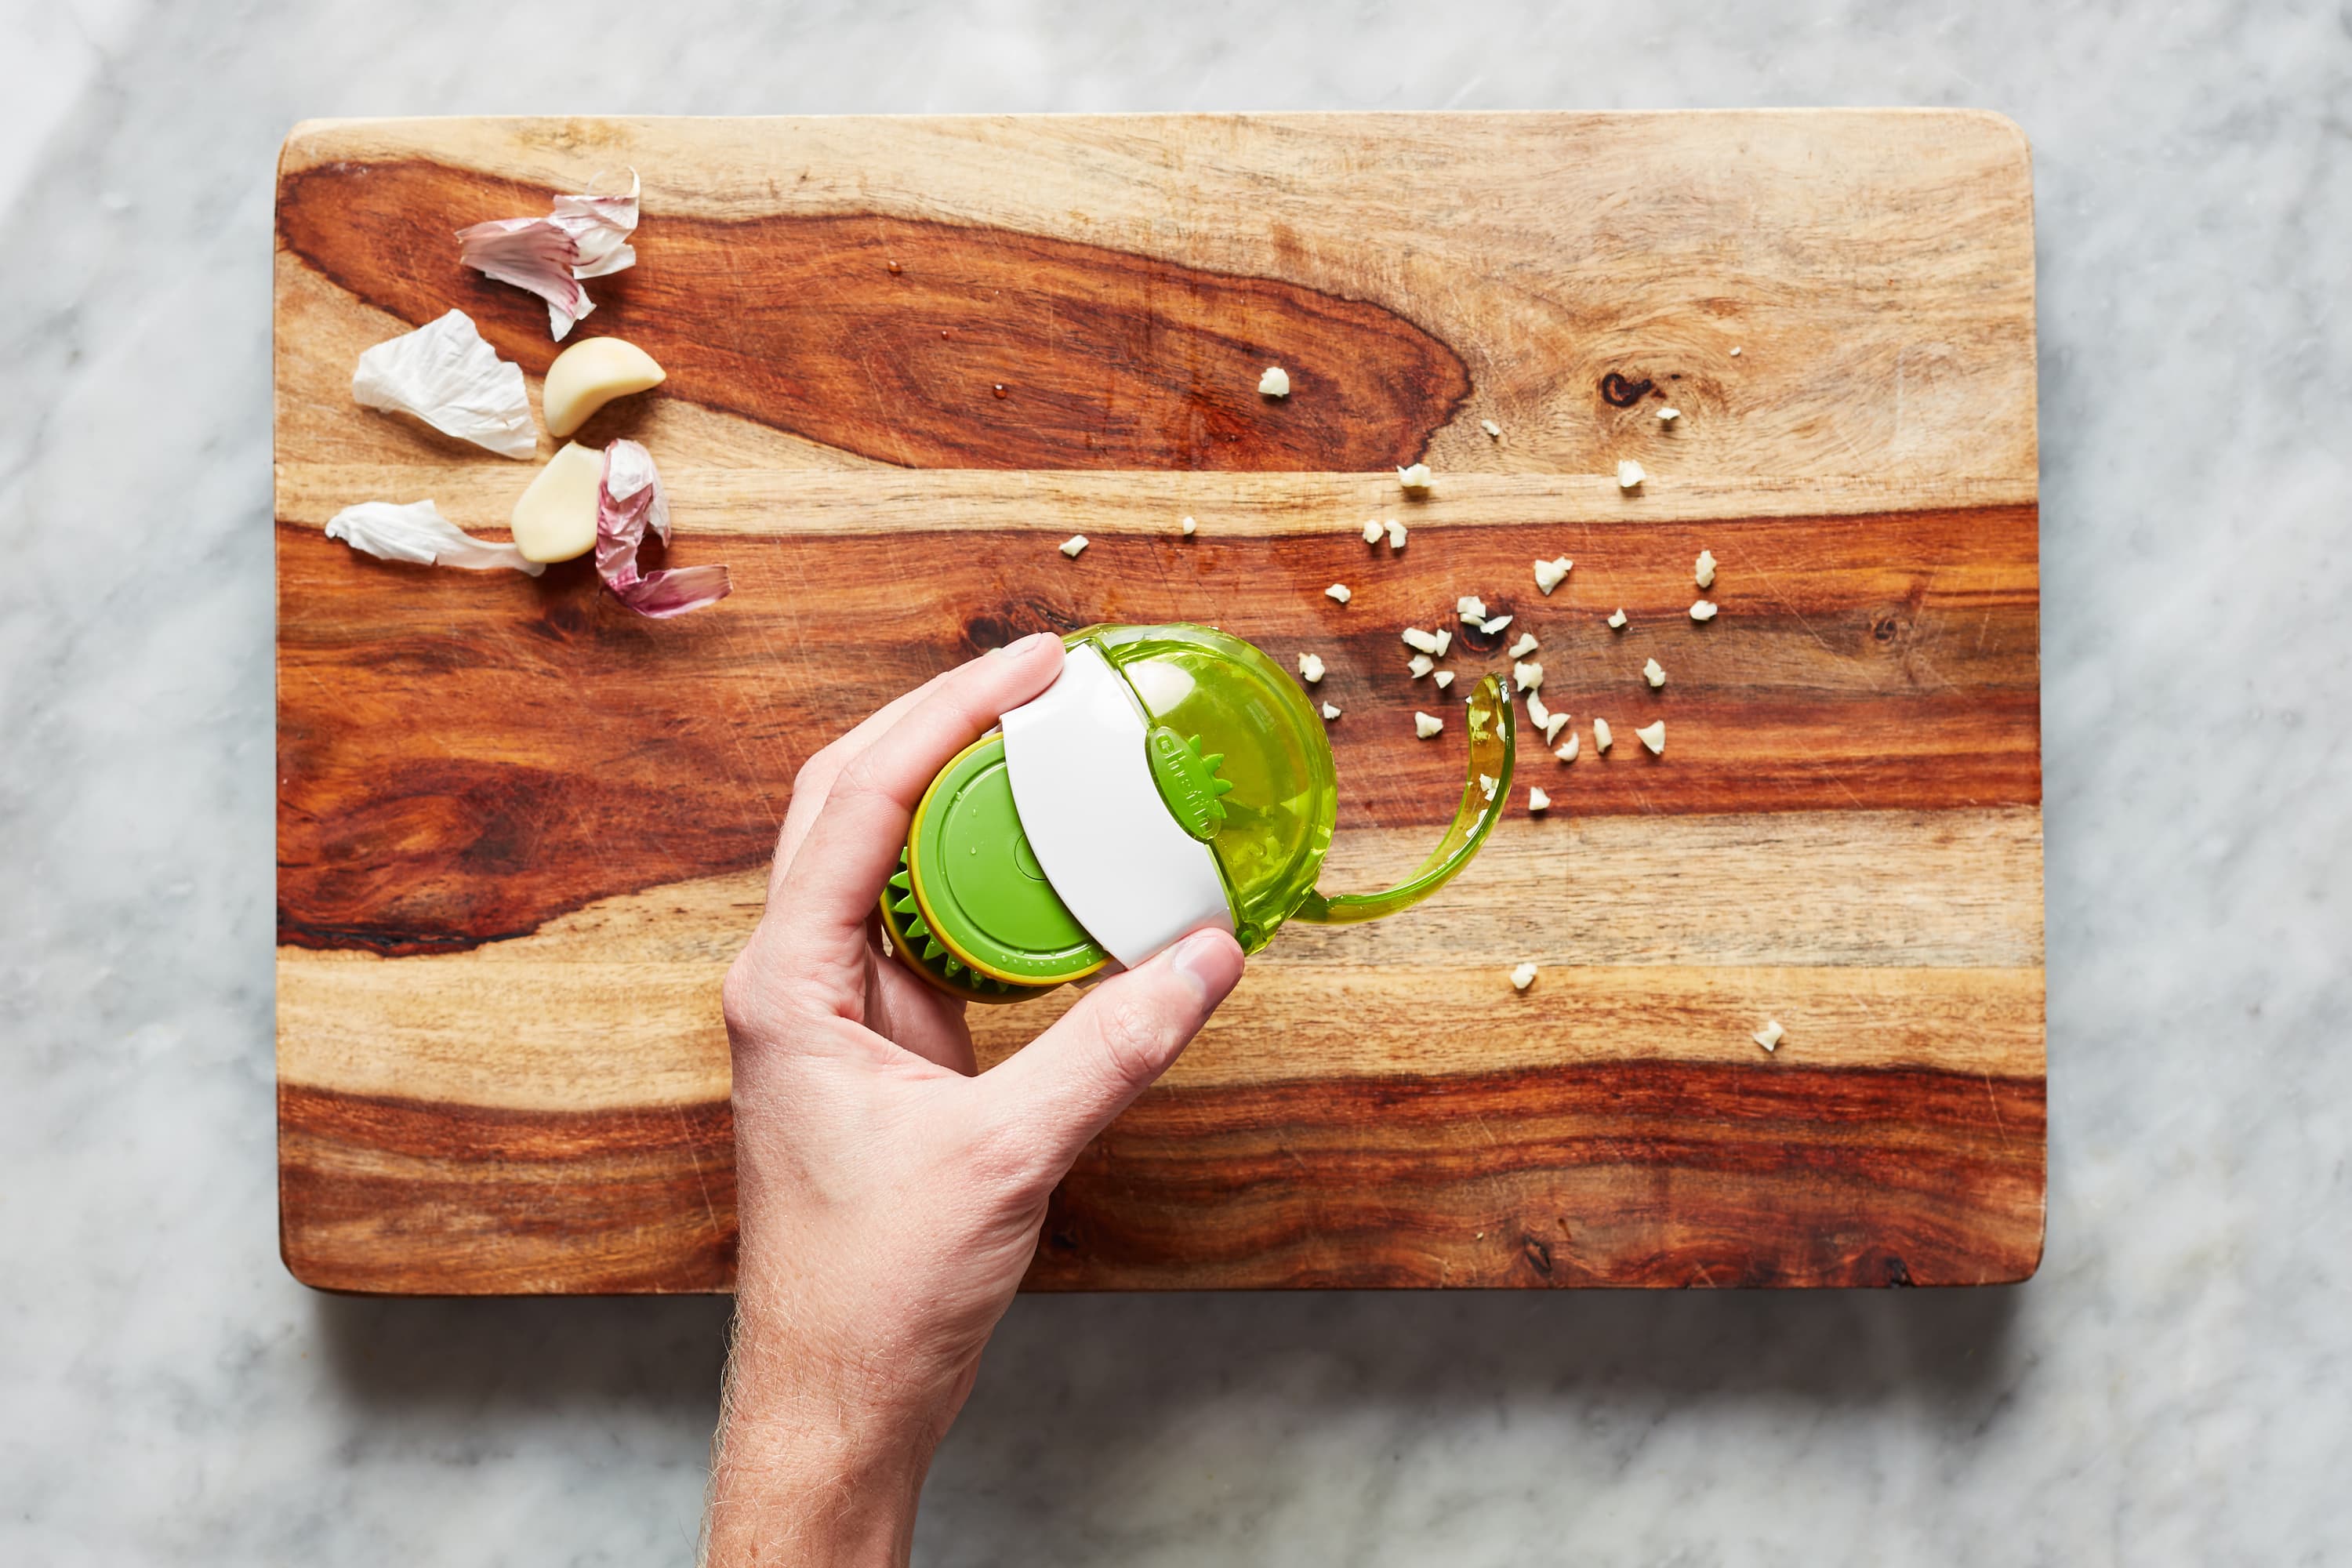 Material Cutting Board Is Fantastic According to Brightland Founder